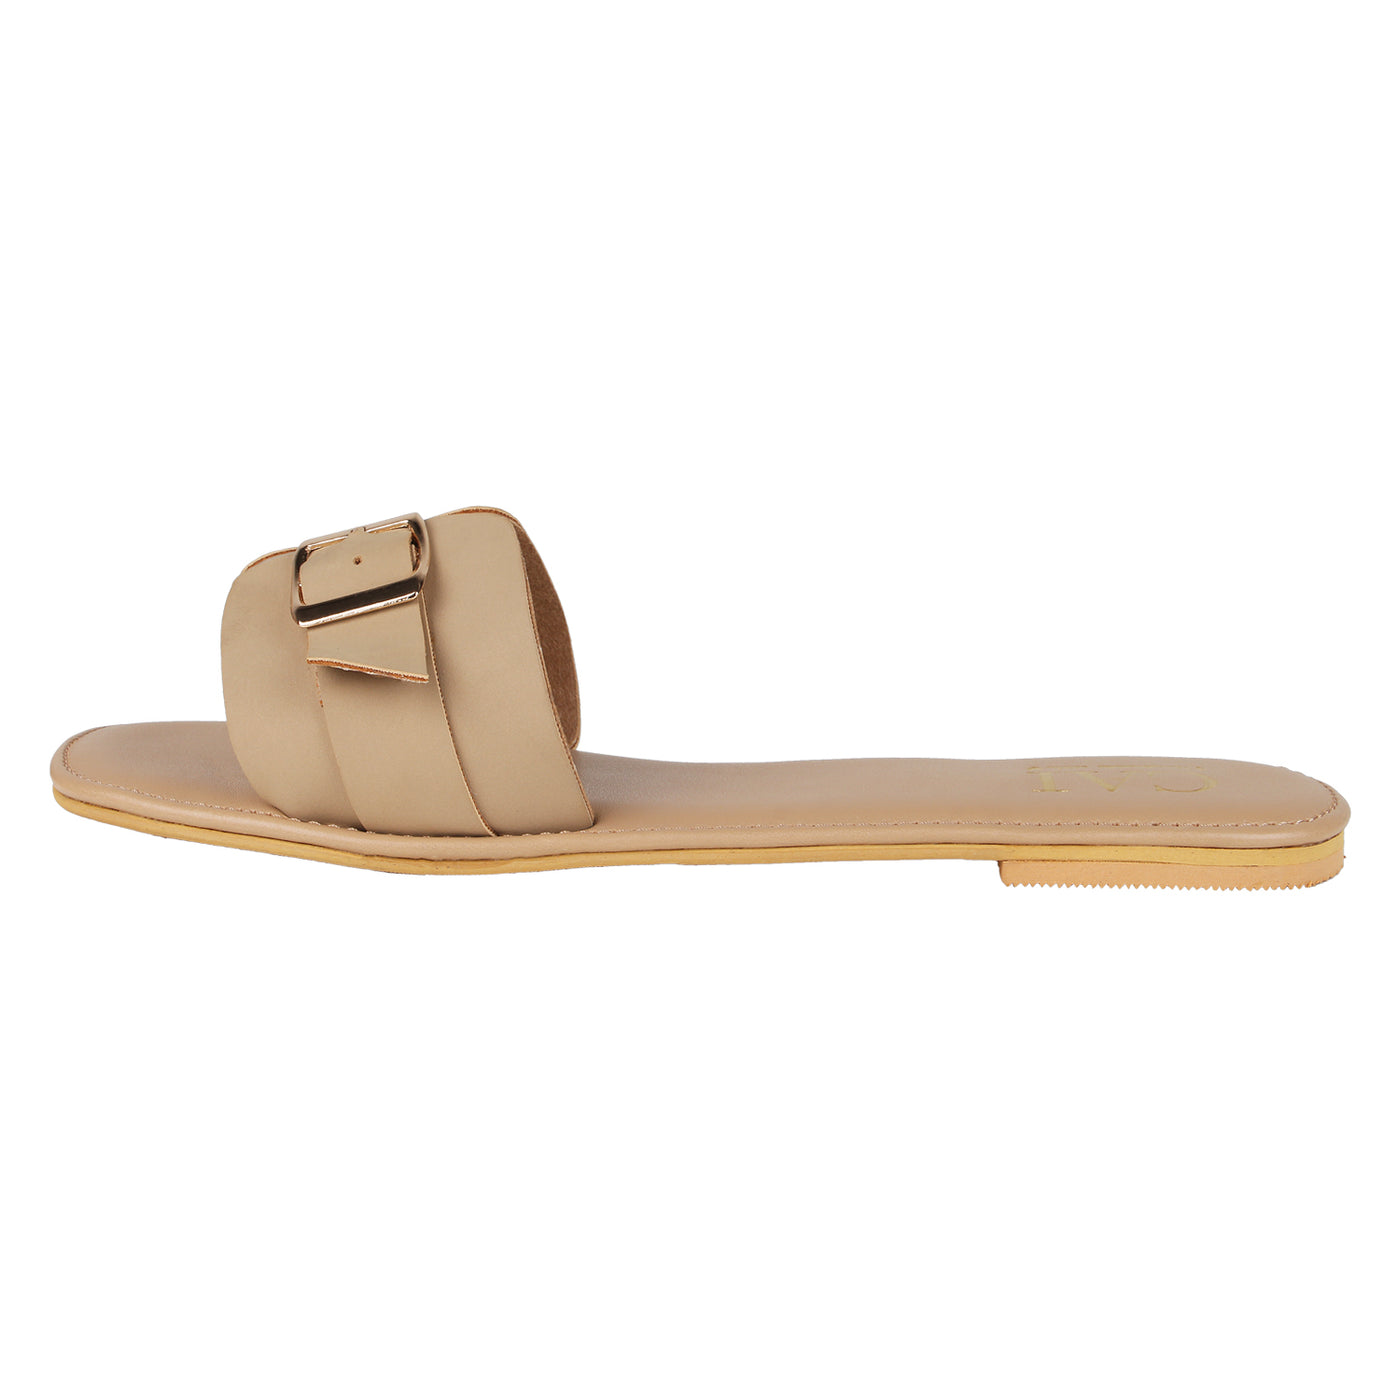 Nude Flap Flats at The Cai Store